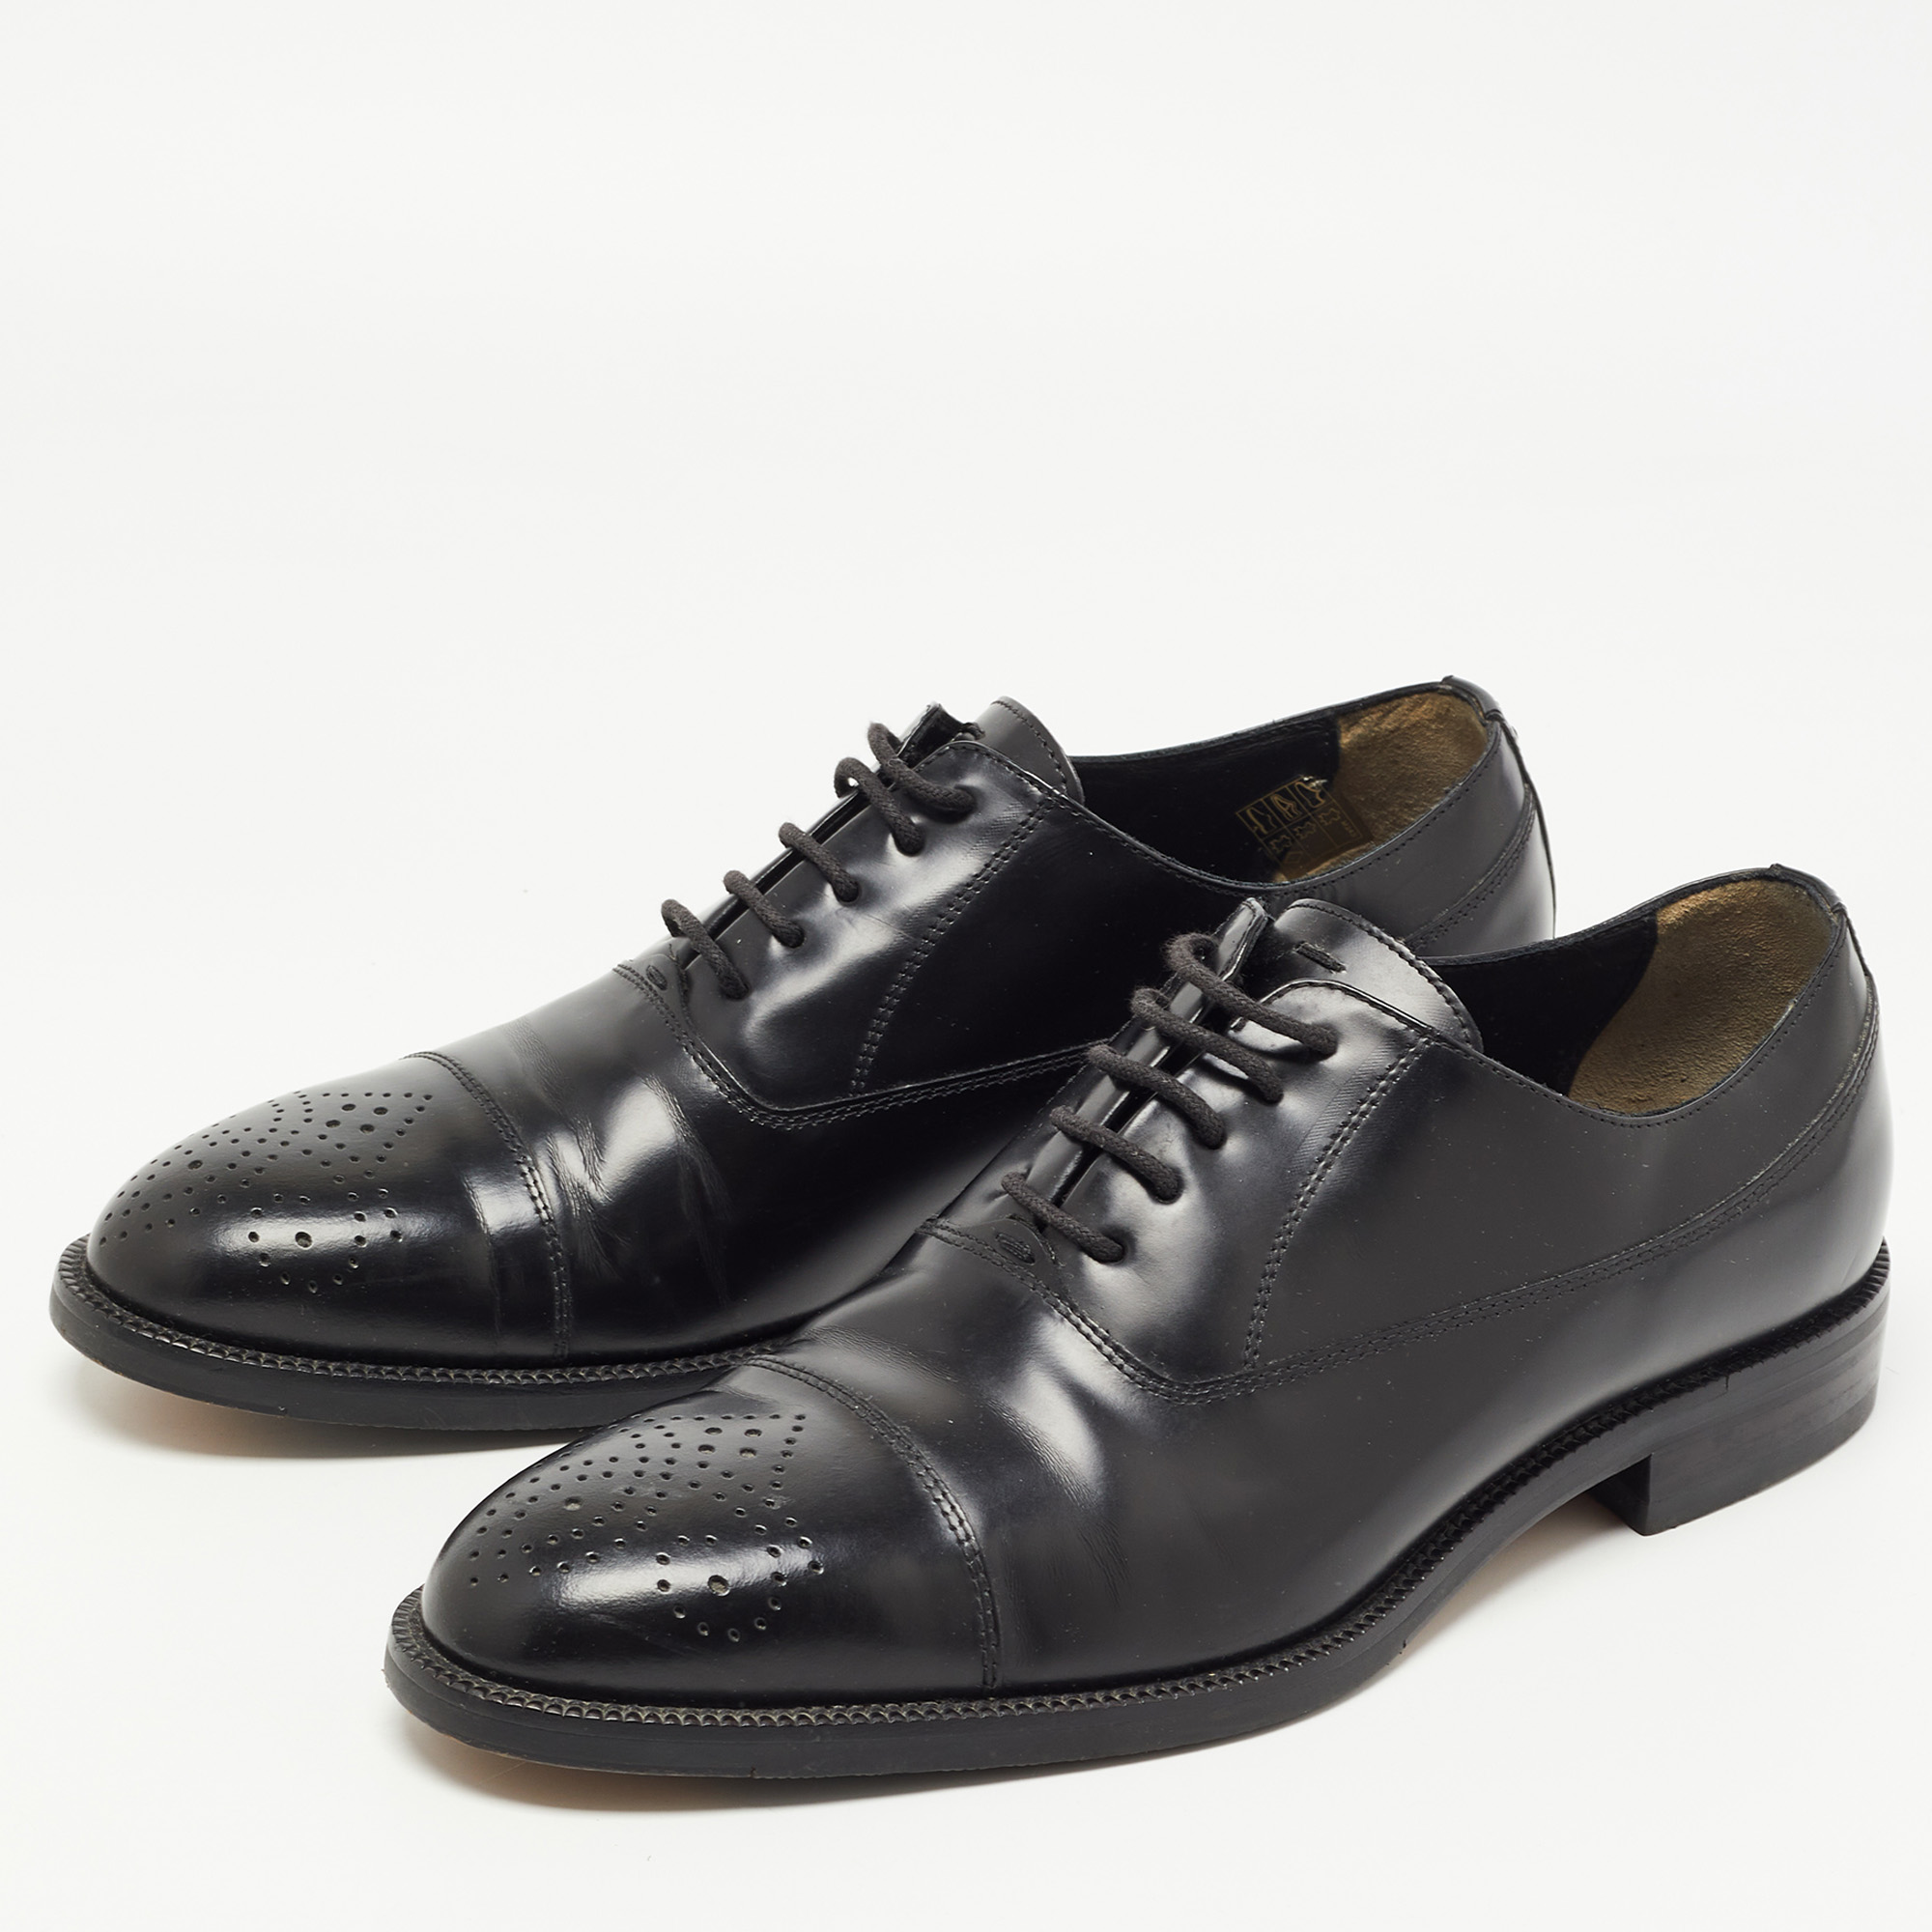 

Fendi Black Leather Perforated Lace Up Oxfords Size